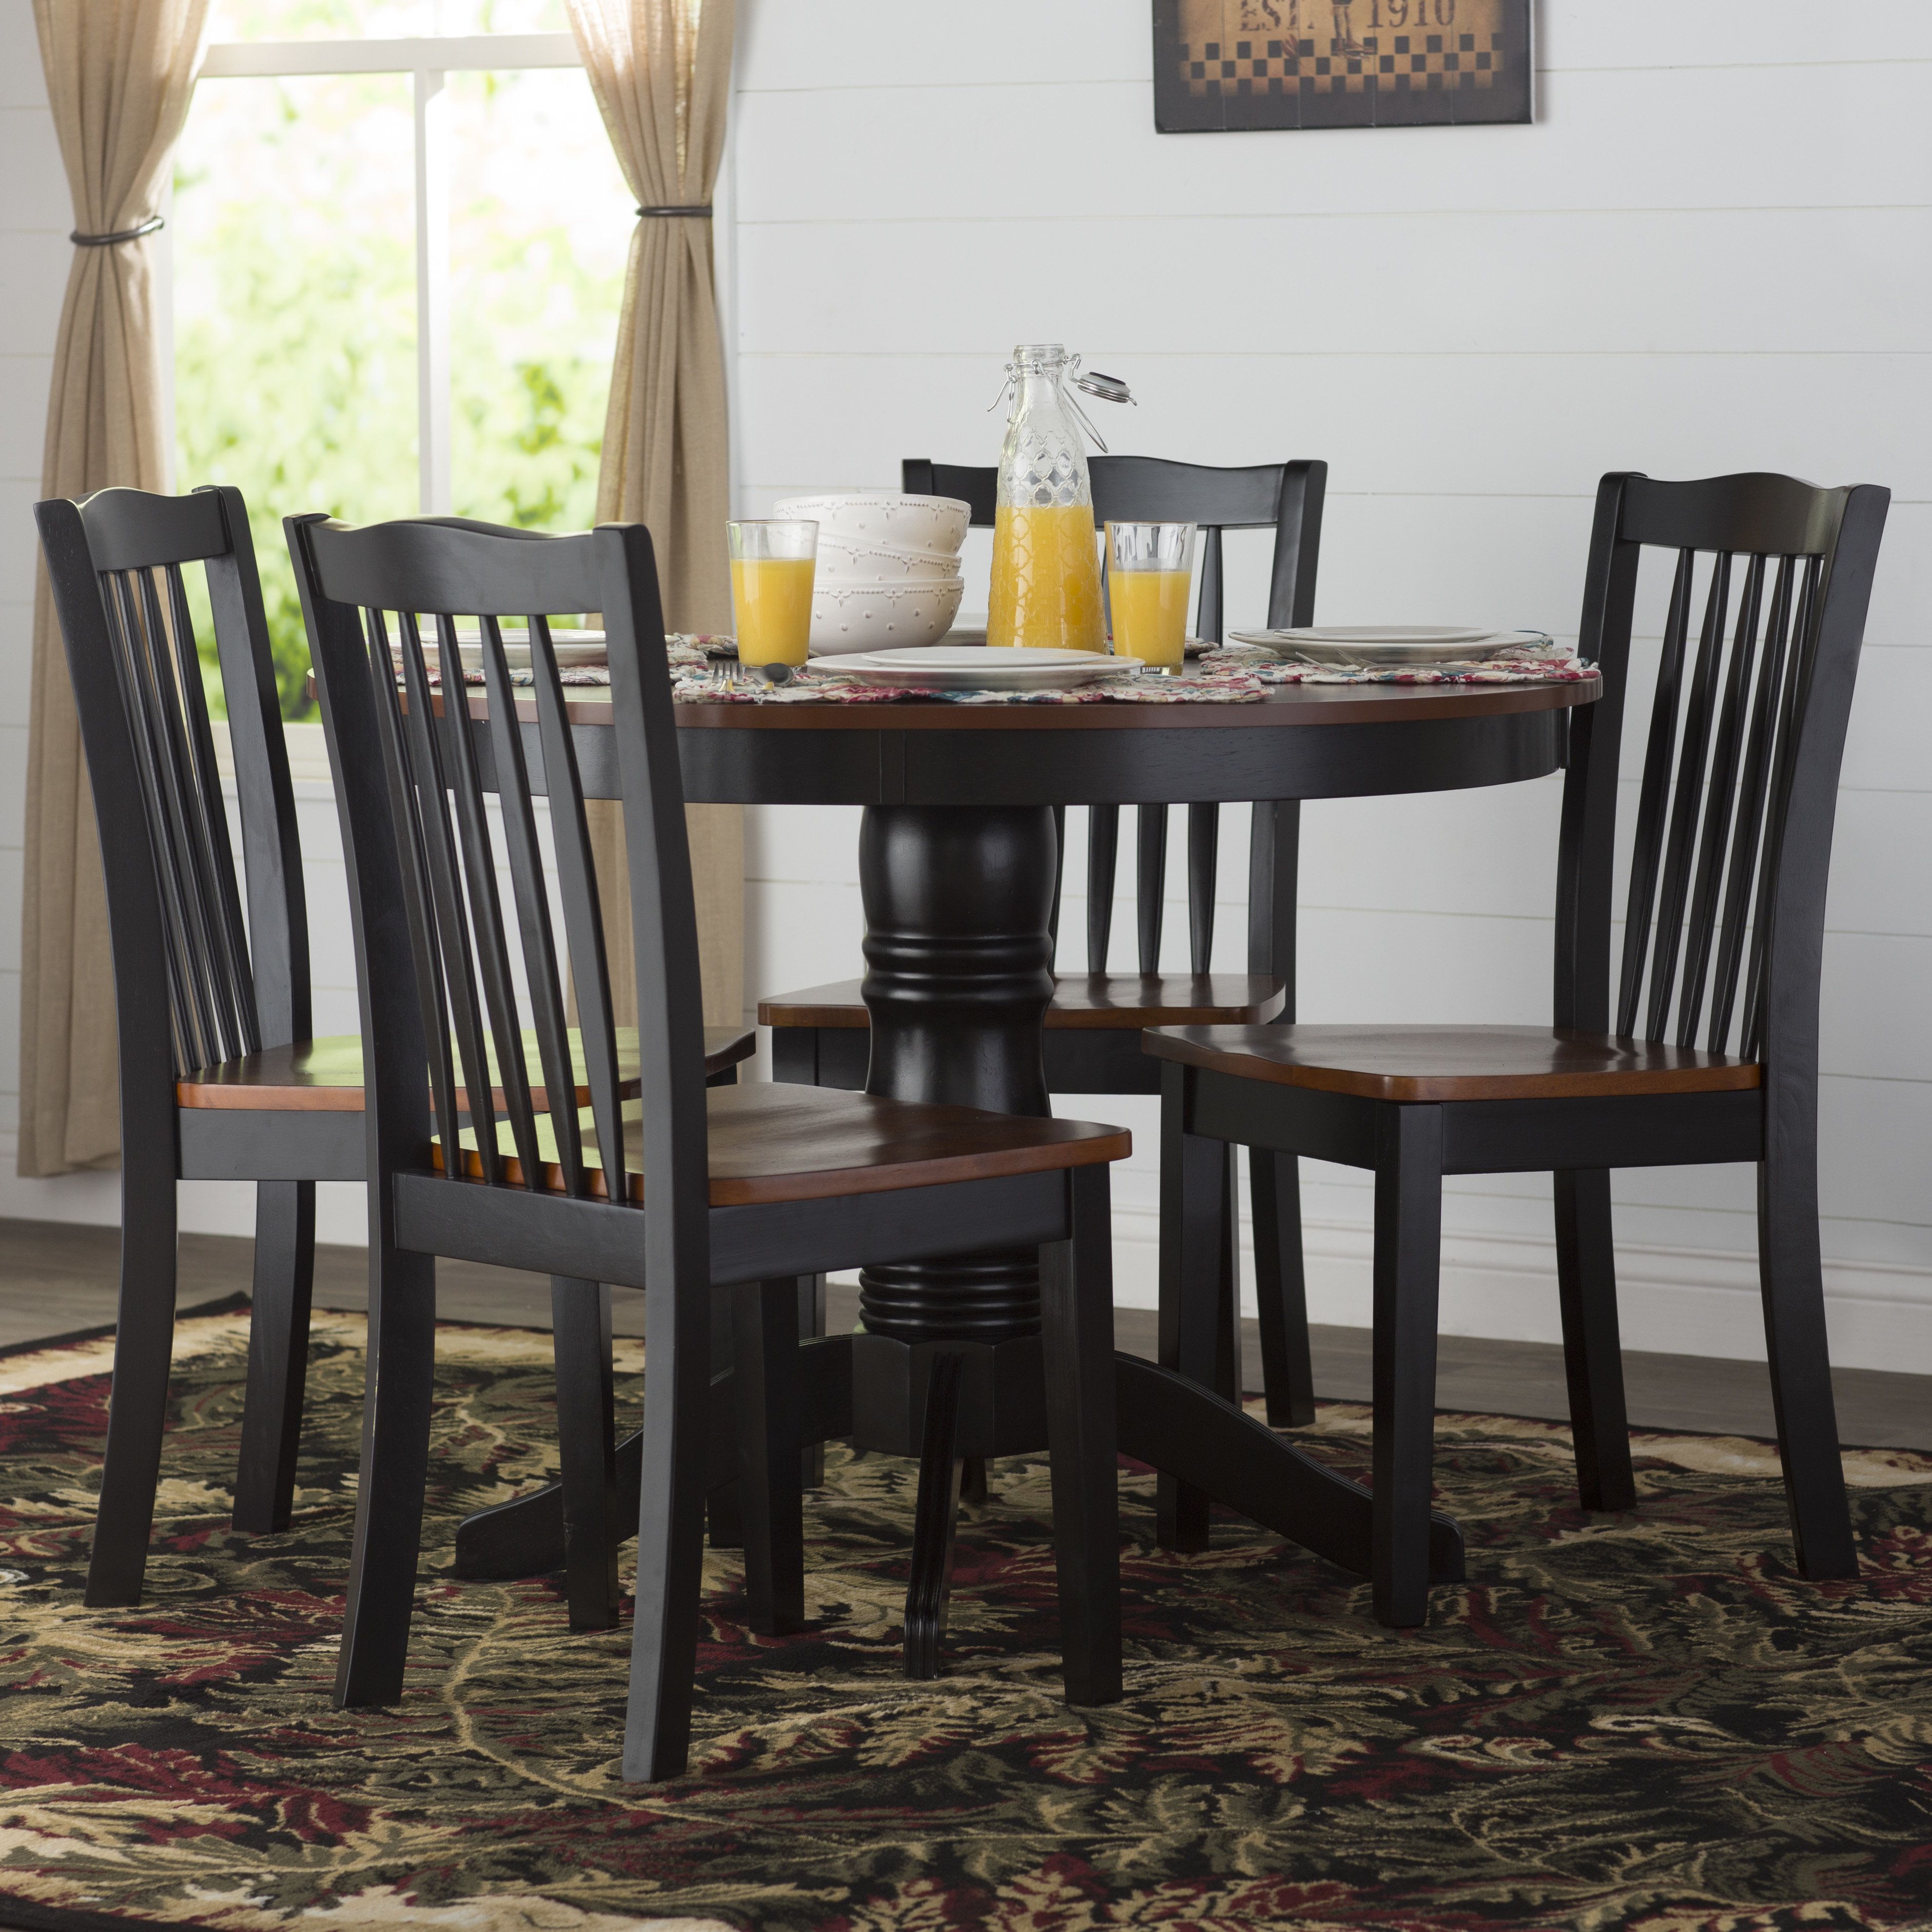 Tighe 5 Piece Dining Set Intended For Most Recently Released Pattonsburg 5 Piece Dining Sets (View 9 of 20)